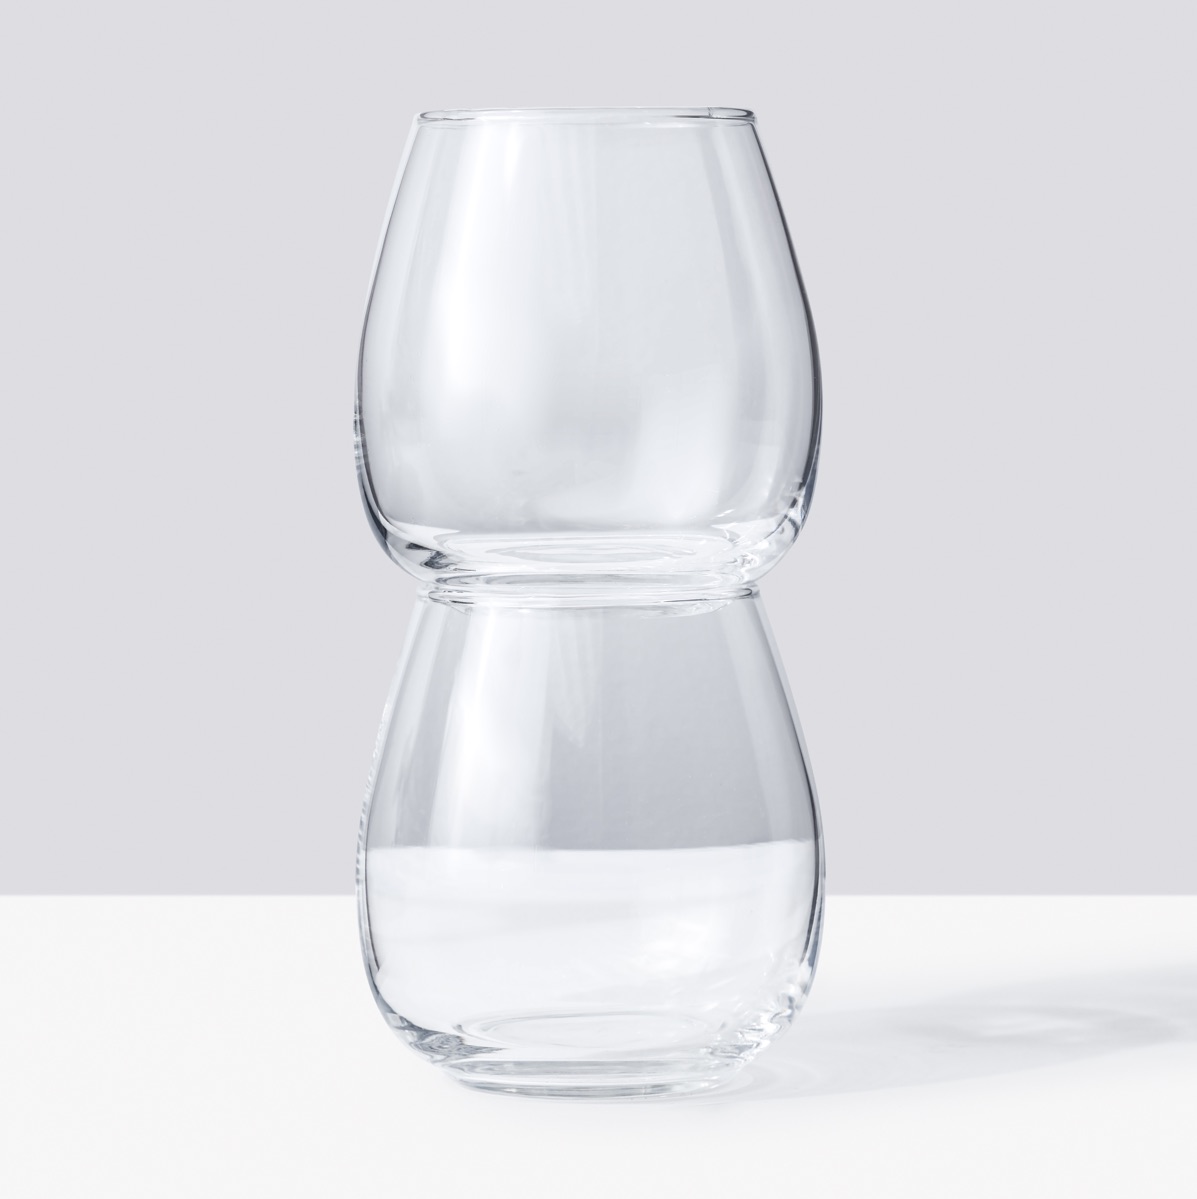 Two stemless wine glasses, stacked